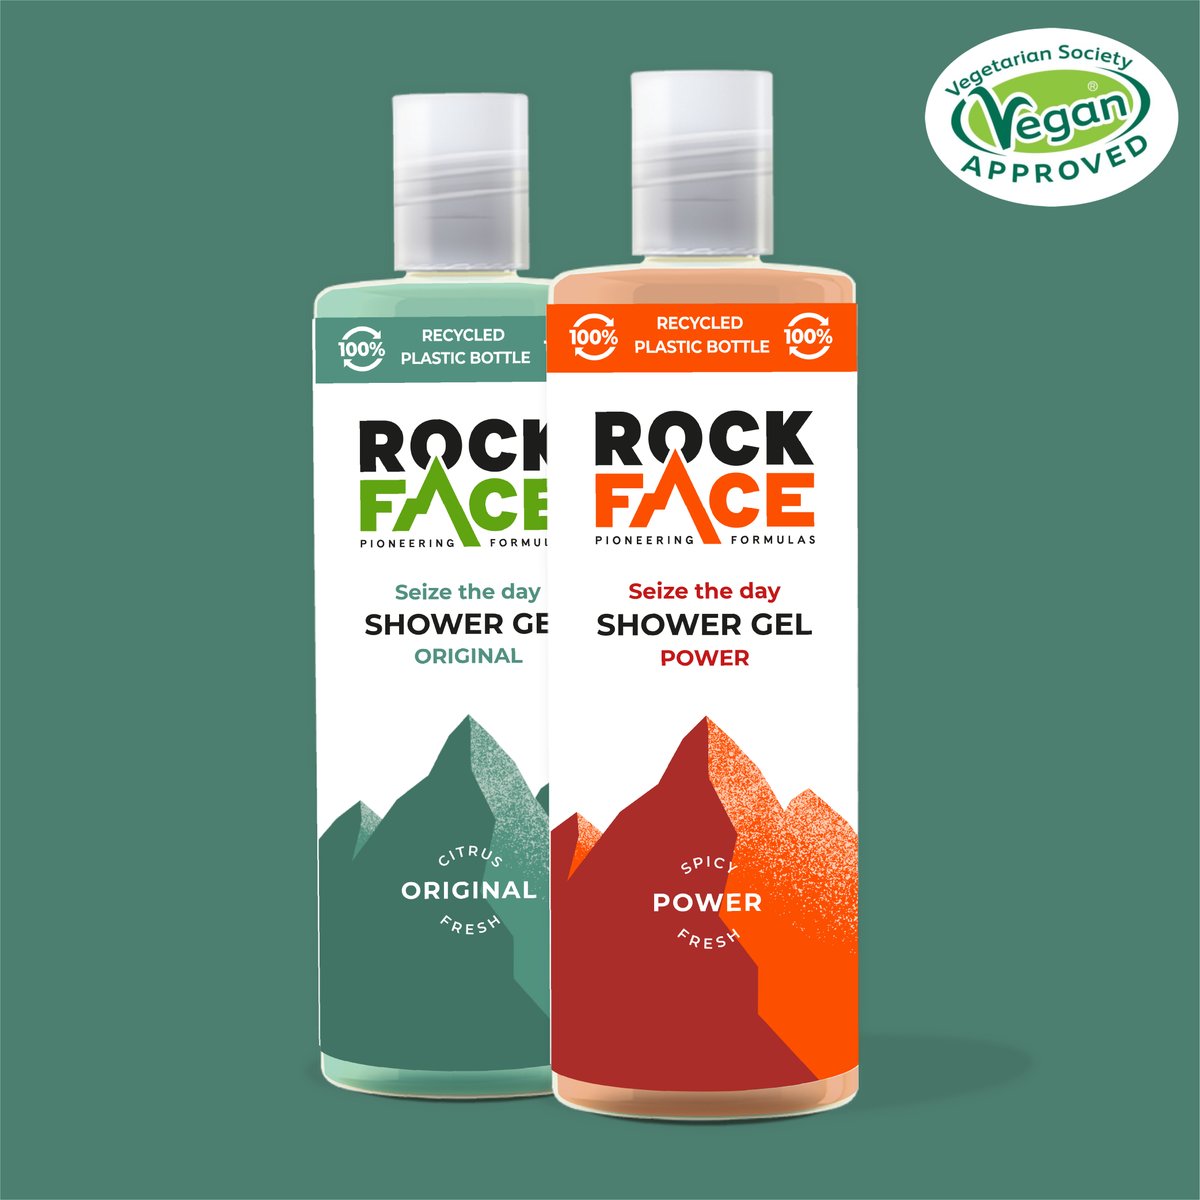 Level up your shower game with Rock Face For Men plant-powered shower gels🚿🌿 Infused with nature's goodness, because your skin deserves the best🌈 #Vegan accredited by @vegsoc🌱 #VegetarianSocietyApproved #VeganEssentials #RockFace4MenUK